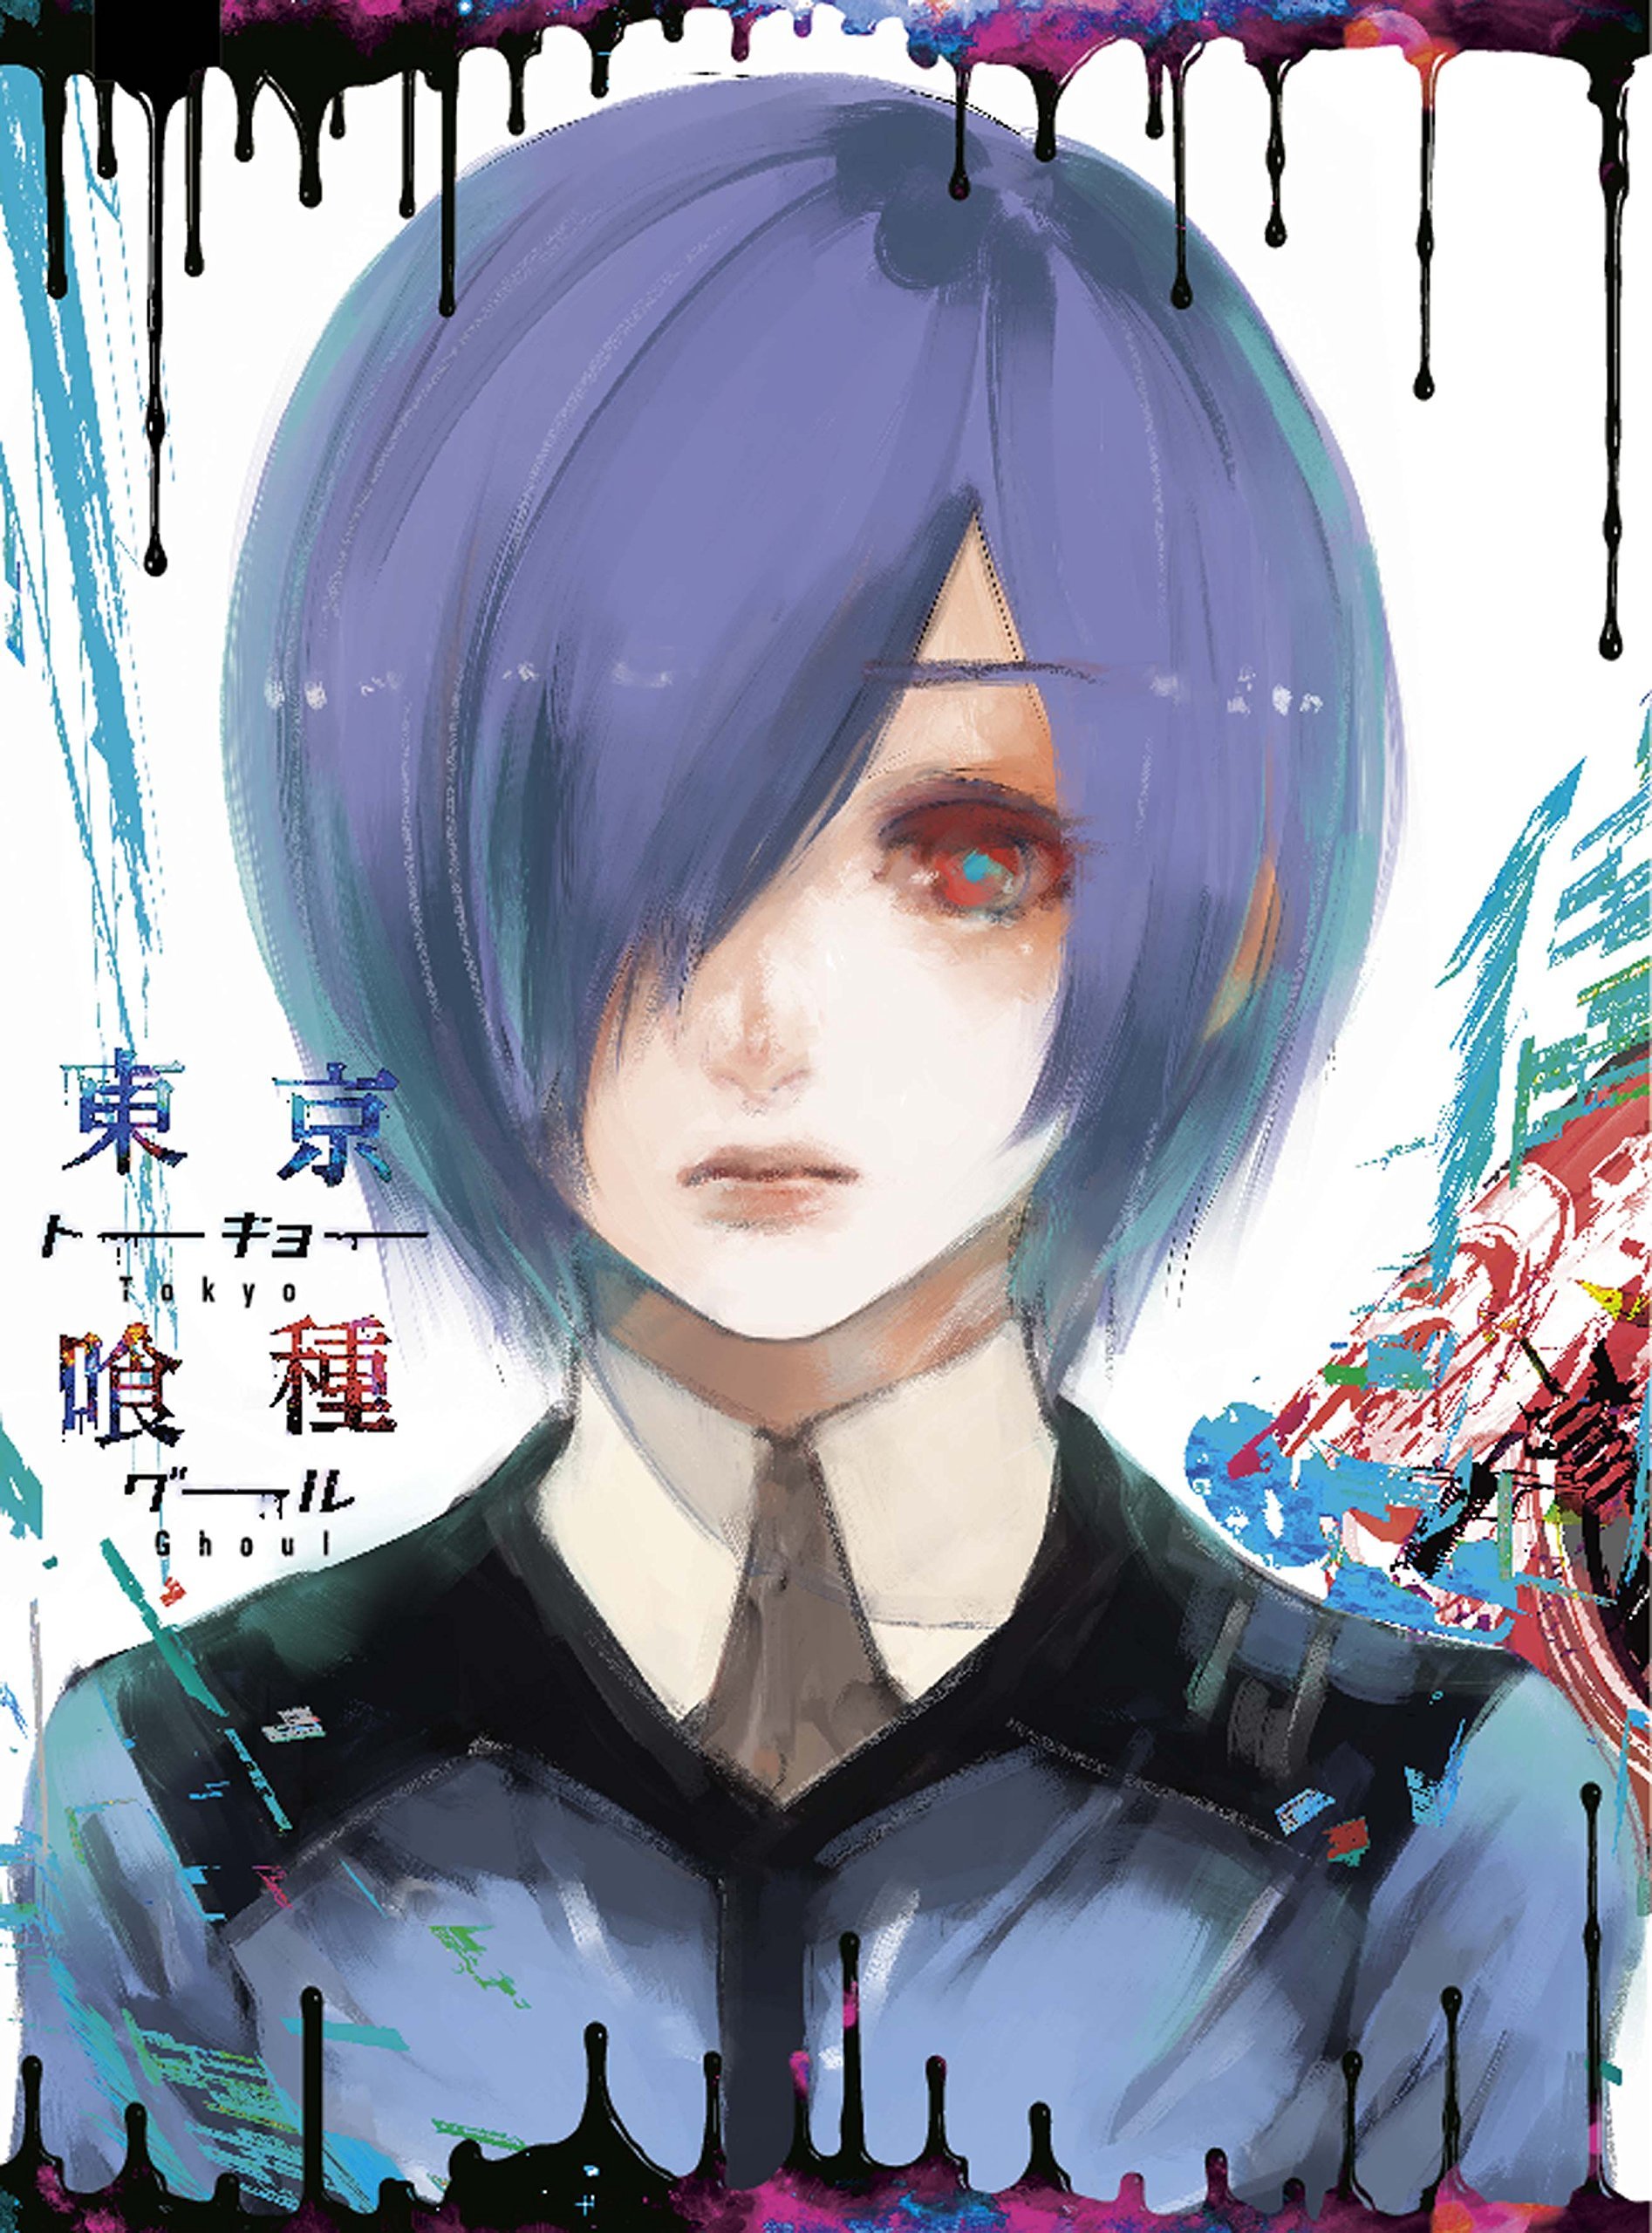 Tokyo Ghoul:re | Tokyo Ghoul Wiki | FANDOM powered by Wikia